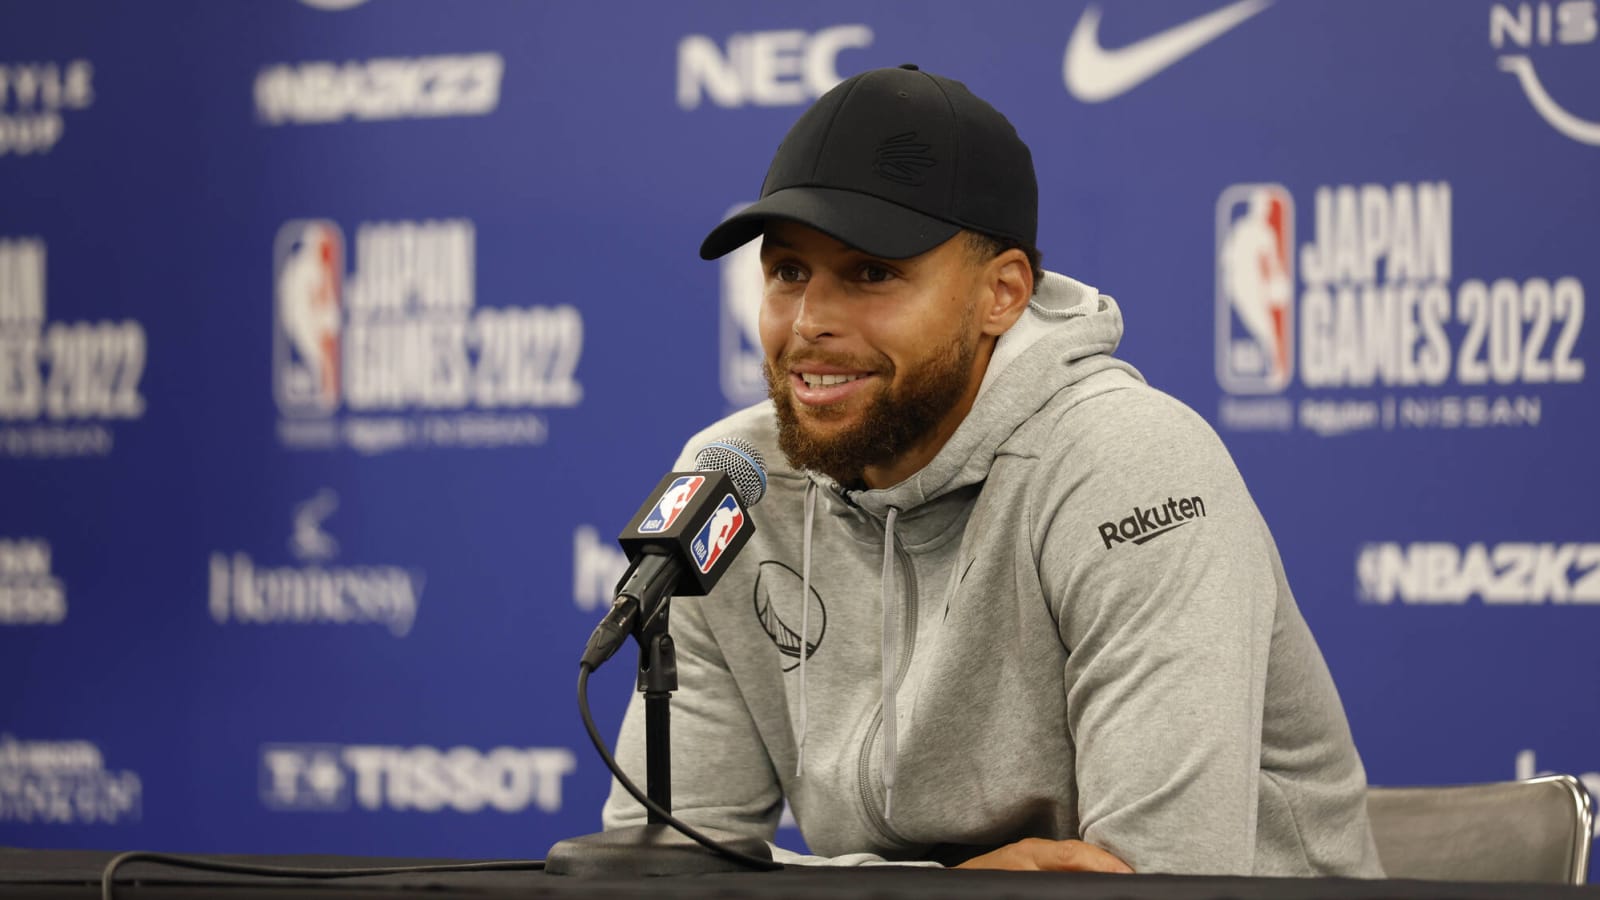 Stephen Curry featured as playable character in PGA TOUR 2K23